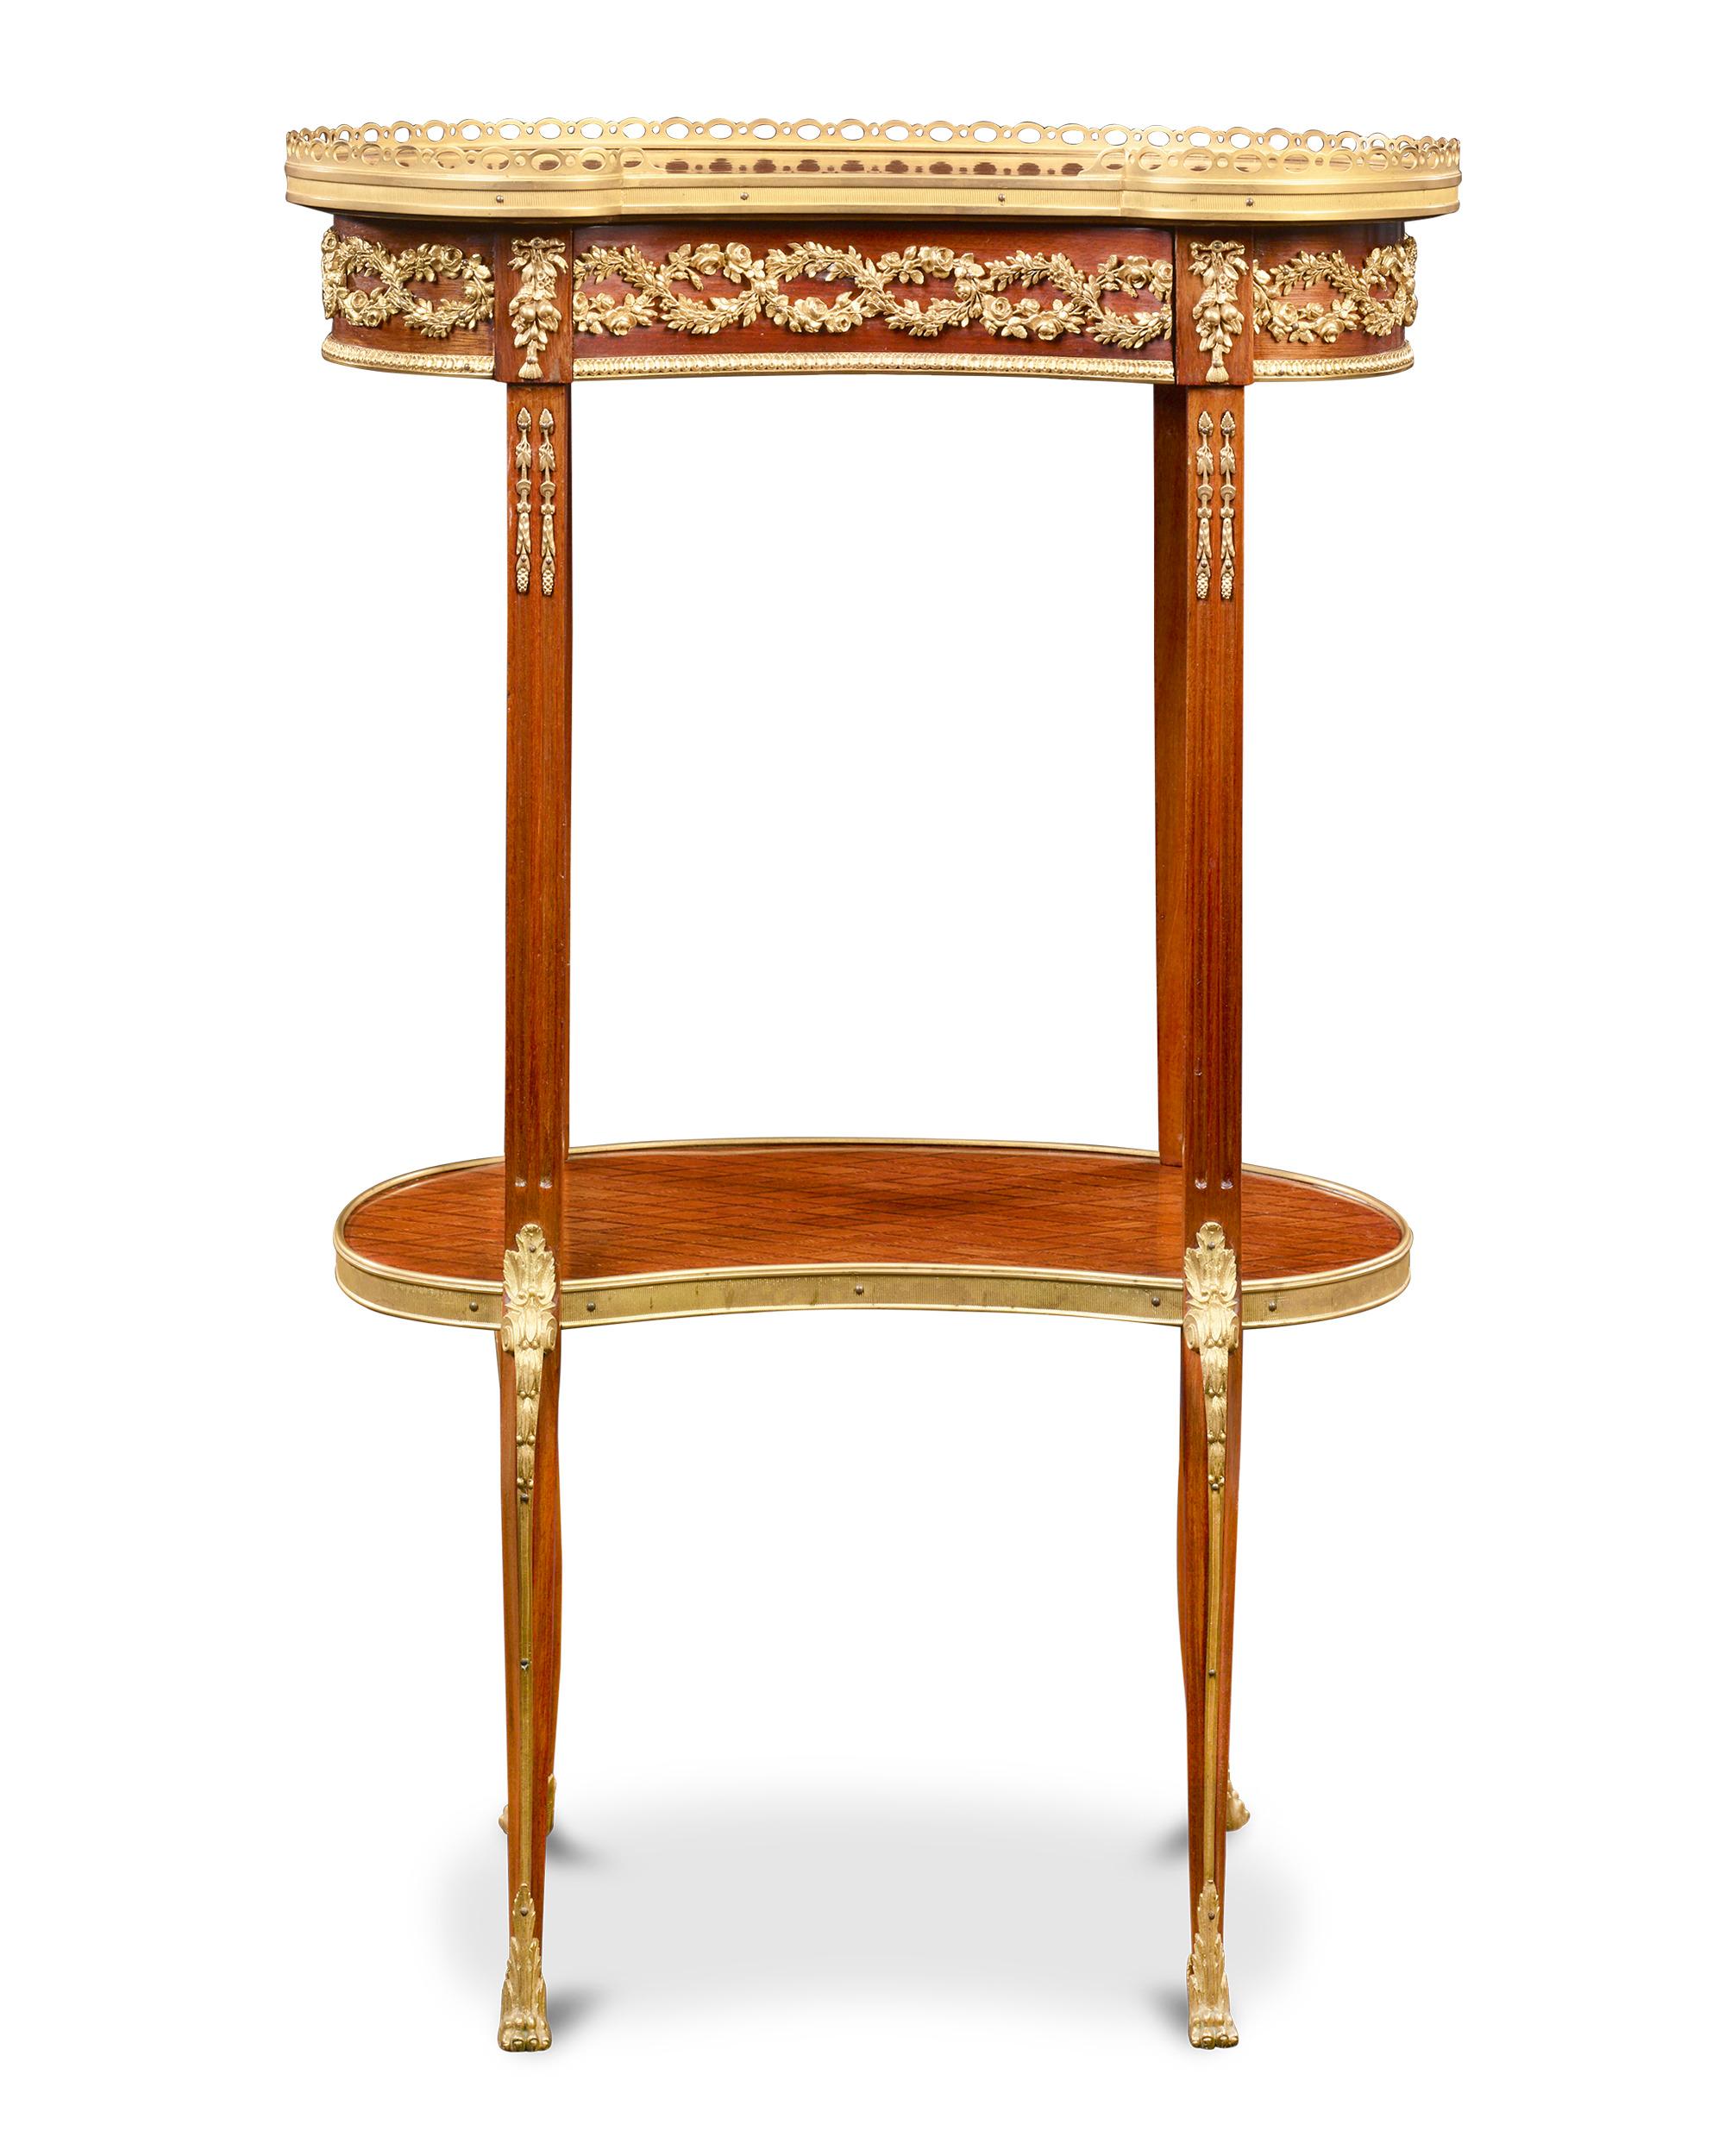 Fashioned in the Louis XVI style, this elegant kidney-shaped French marquetry side table is decorated with a rich diamond pattern inlay. The natural warmth of the wood shines through and is flawlessly complemented by the classically-inspired doré